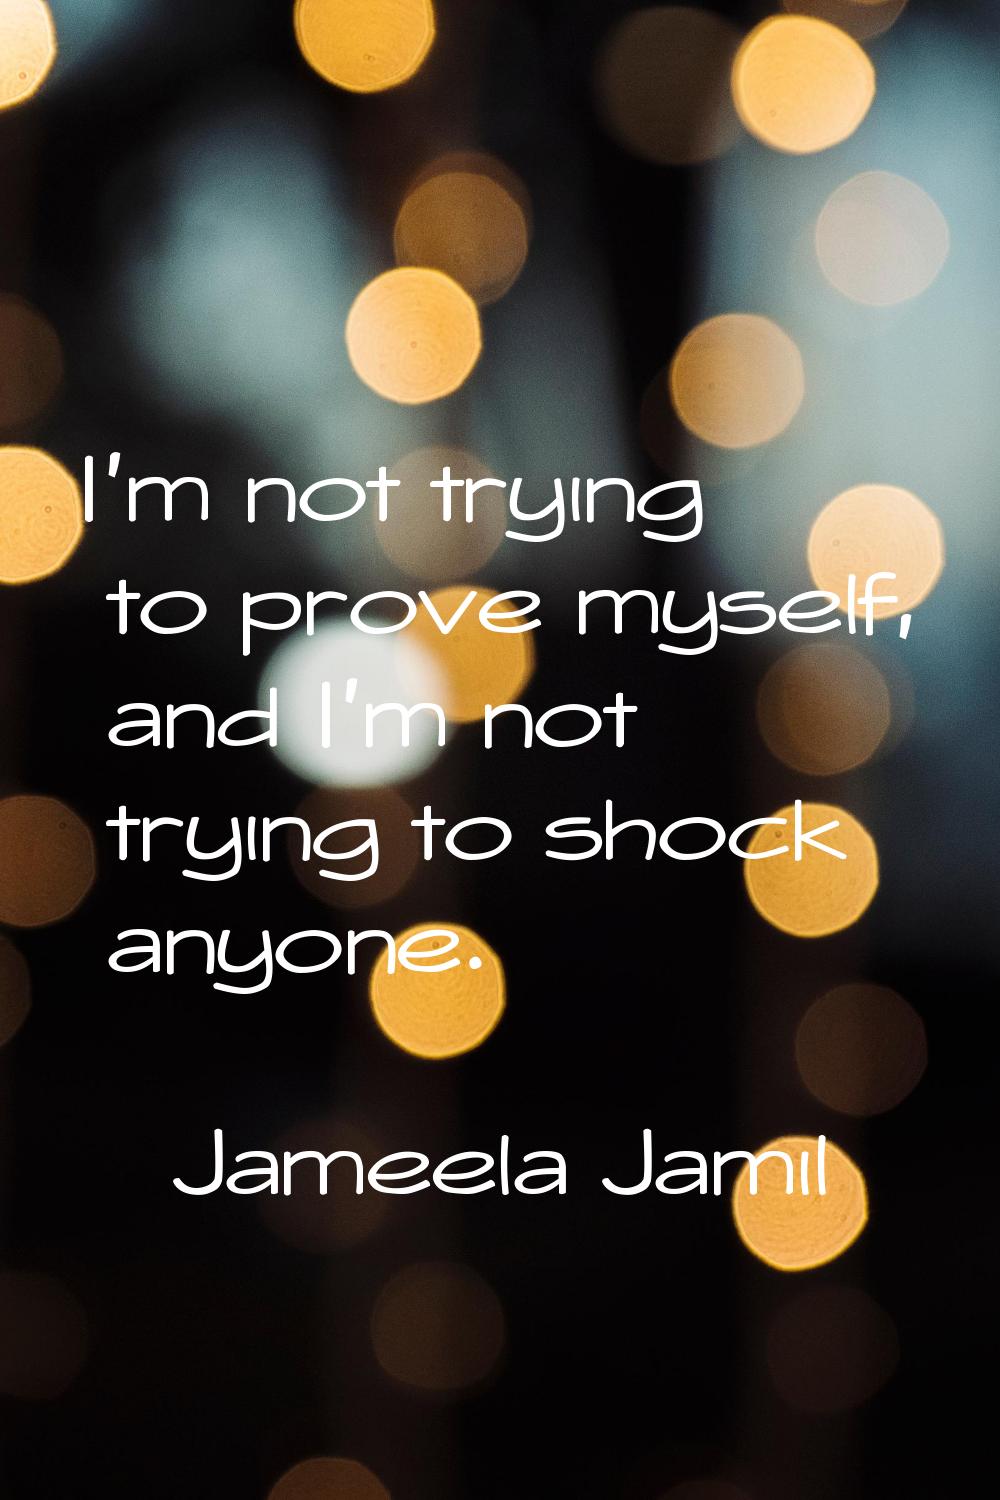 I'm not trying to prove myself, and I'm not trying to shock anyone.